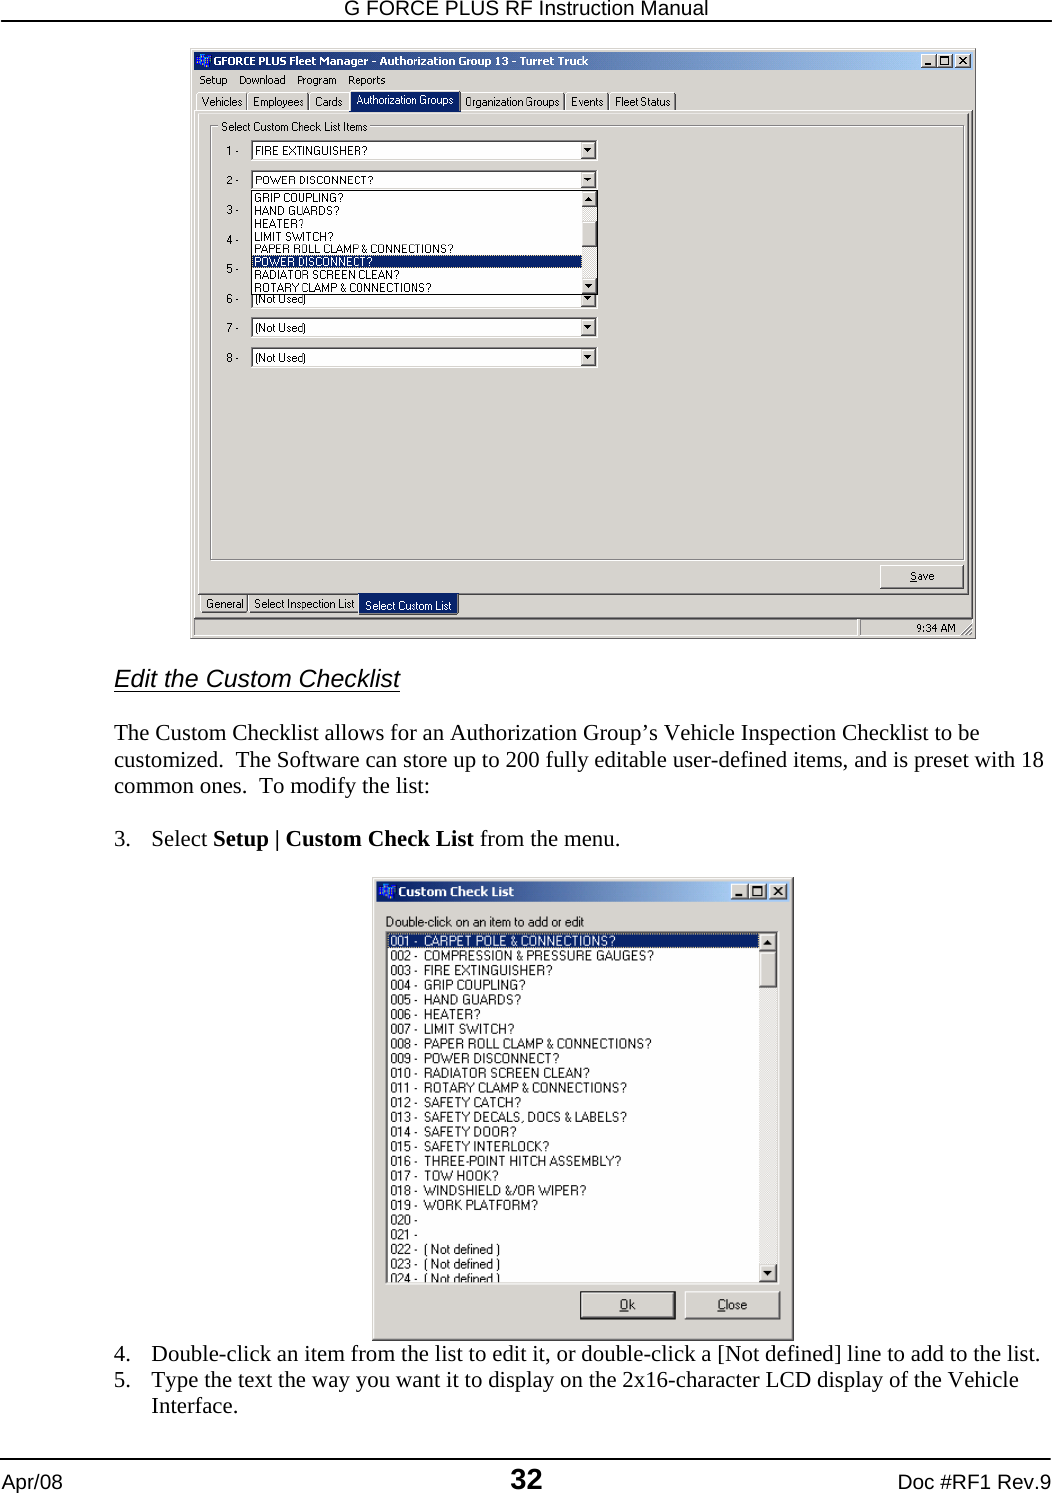 G FORCE PLUS RF Instruction Manual   Apr/08 32 Doc #RF1 Rev.9   Edit the Custom Checklist  The Custom Checklist allows for an Authorization Group’s Vehicle Inspection Checklist to be customized.  The Software can store up to 200 fully editable user-defined items, and is preset with 18 common ones.  To modify the list:  3. Select Setup | Custom Check List from the menu.   4. Double-click an item from the list to edit it, or double-click a [Not defined] line to add to the list. 5. Type the text the way you want it to display on the 2x16-character LCD display of the Vehicle Interface. 